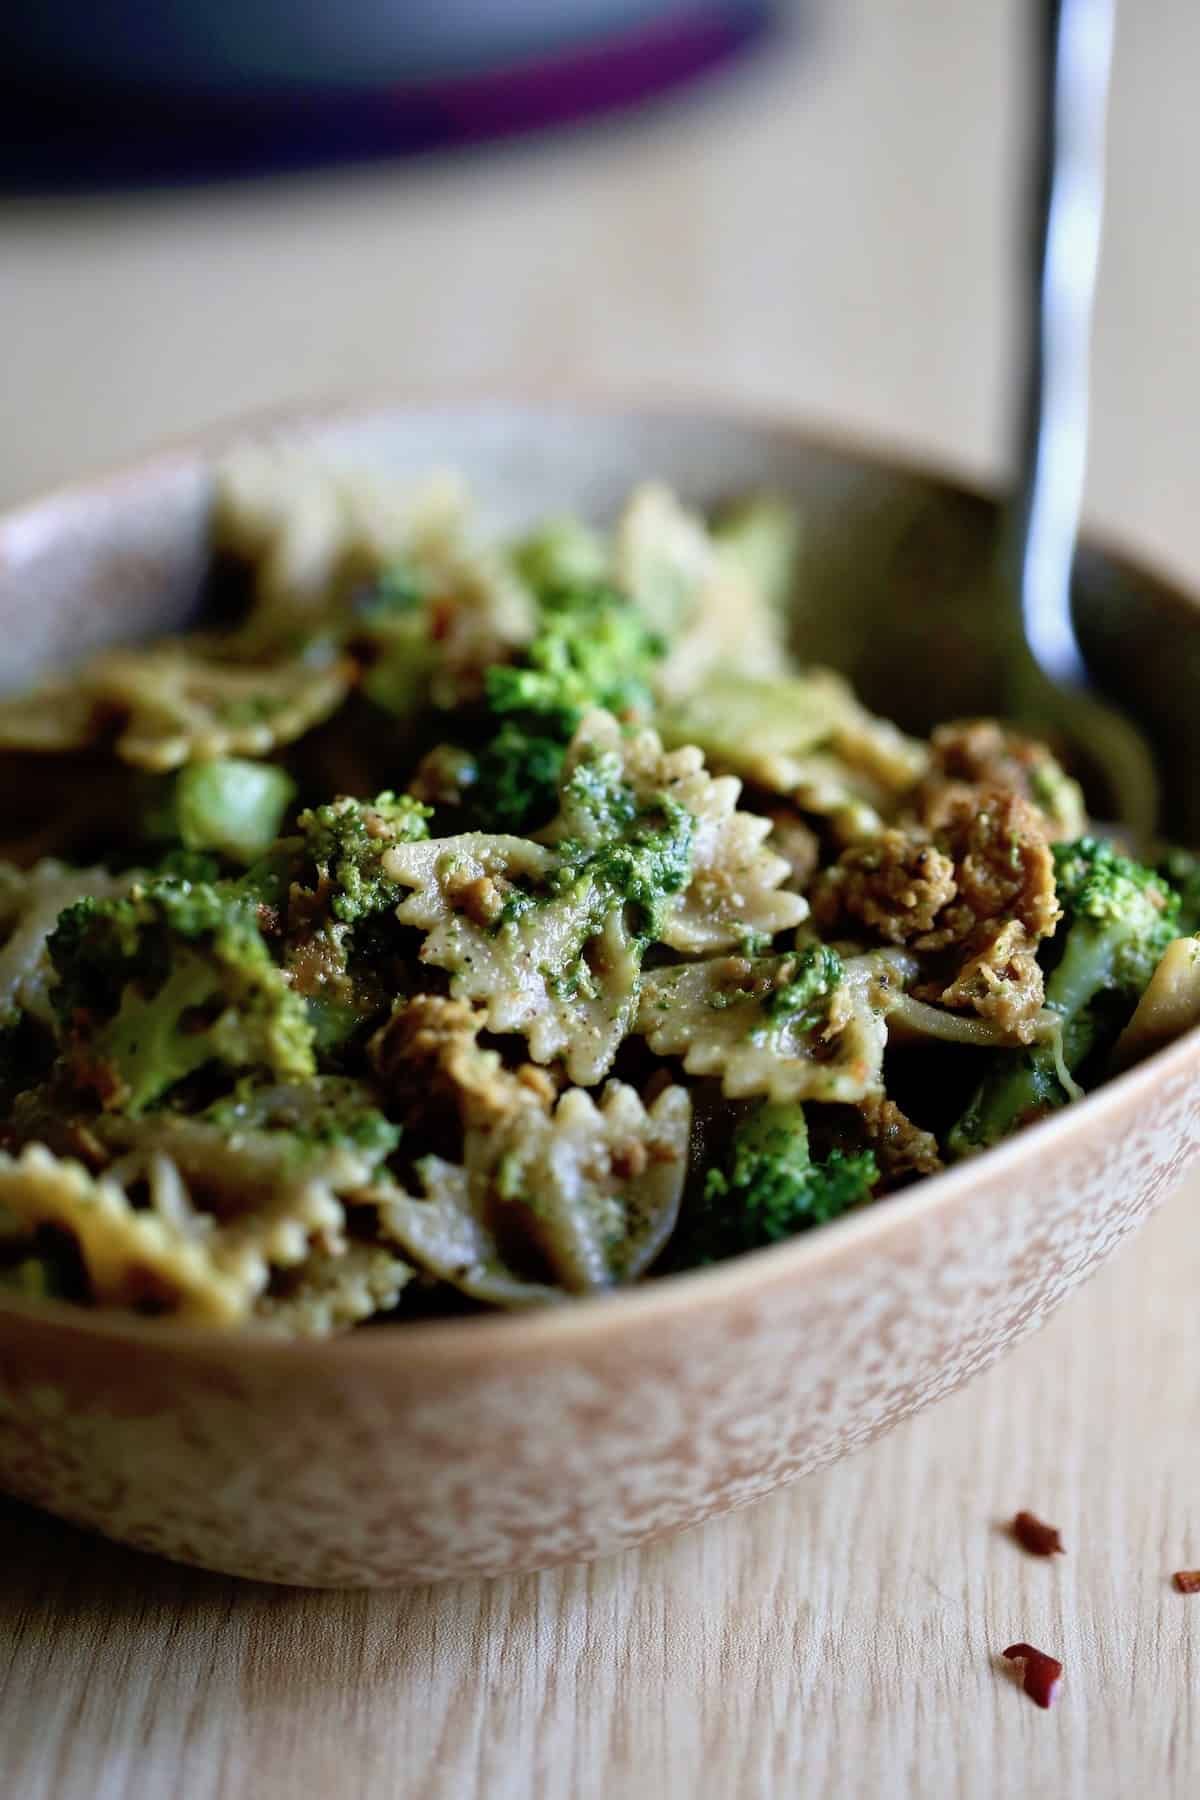 A delicious bowl of pasta featuring broccoli and meat, including beyond sausage.